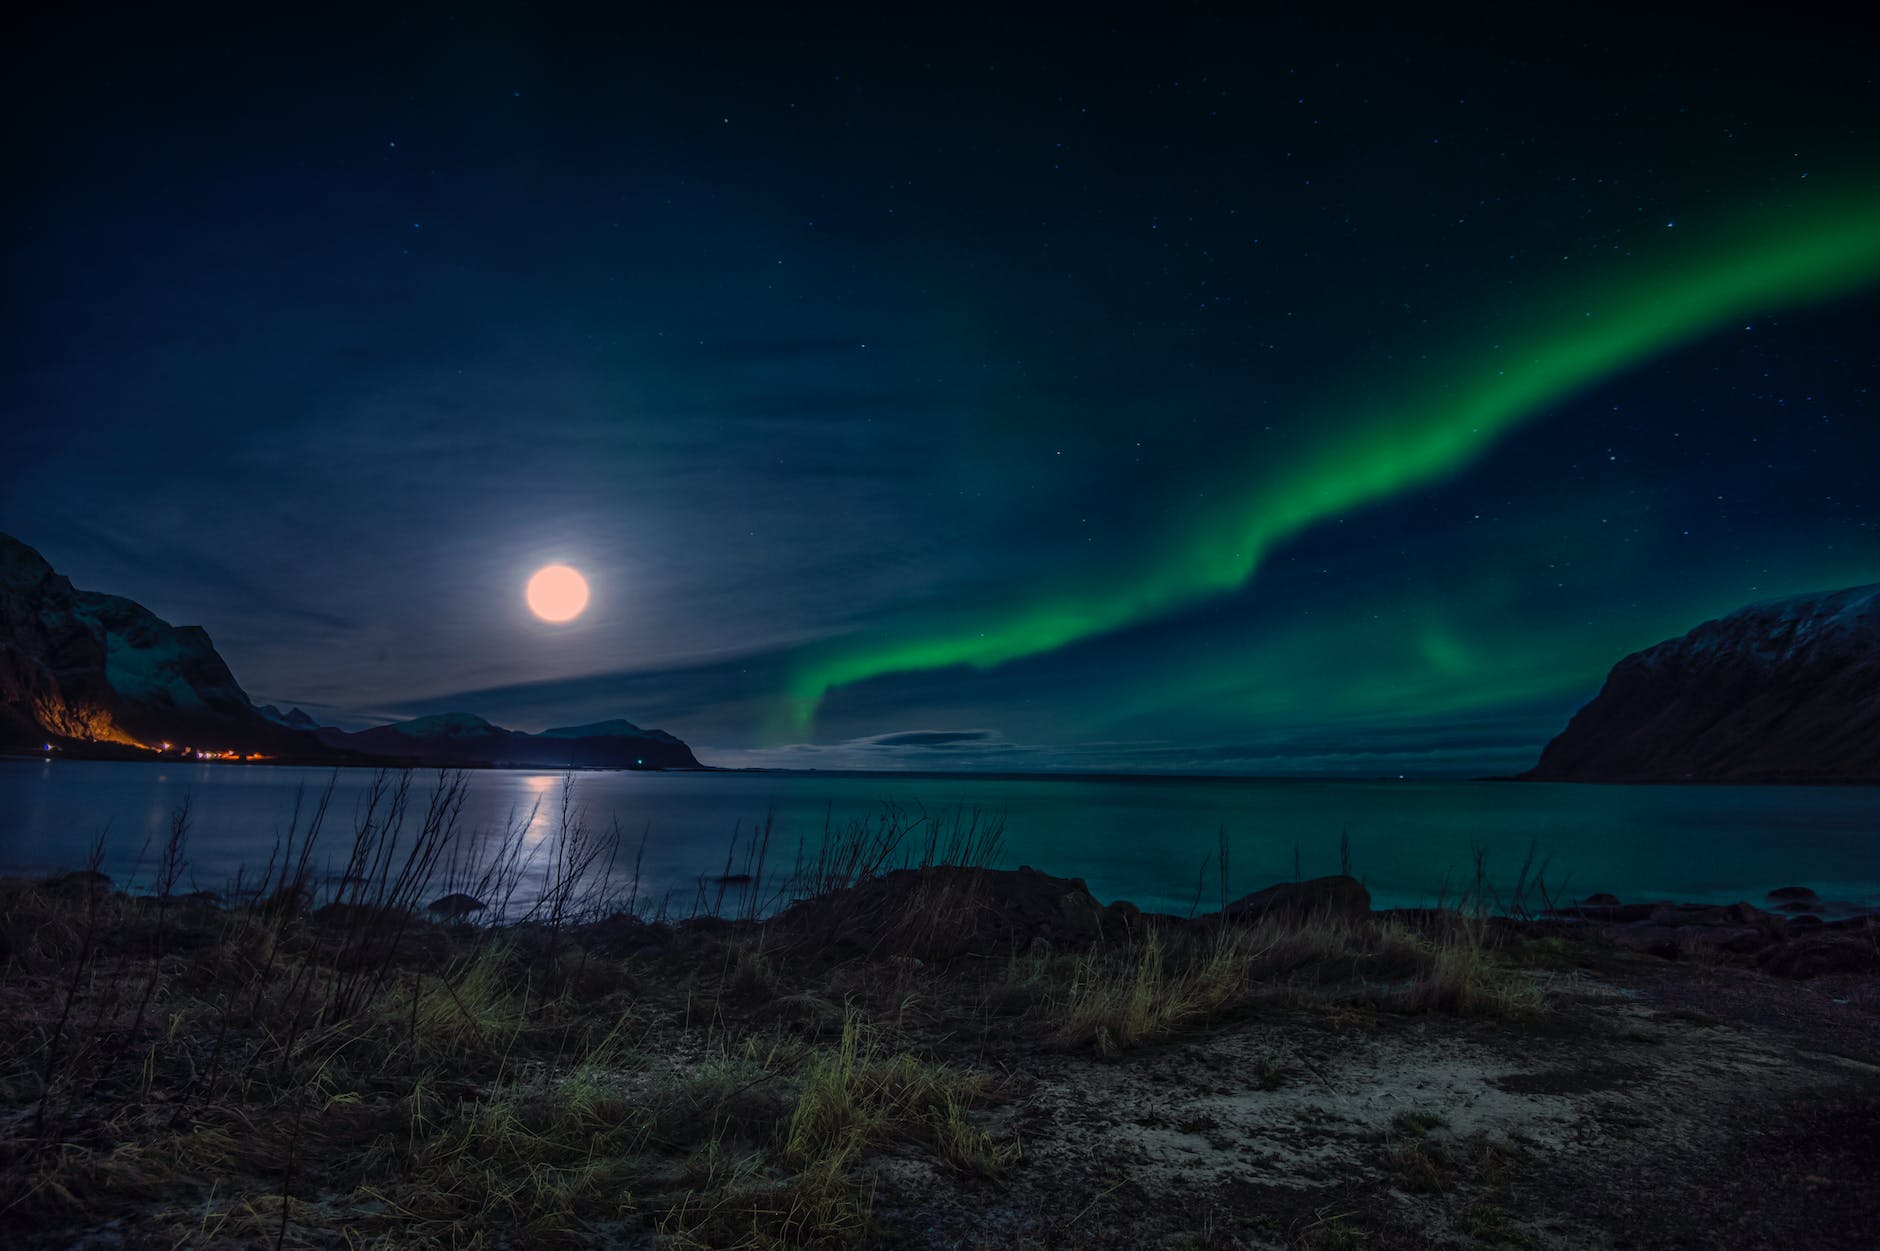 green aurora lights on the right hand side of the image are opposite a full moon on the left. The foreground is a sandy beach with some scrubby brush and what looks to be a town glows orange at the base of a mountain across the water.